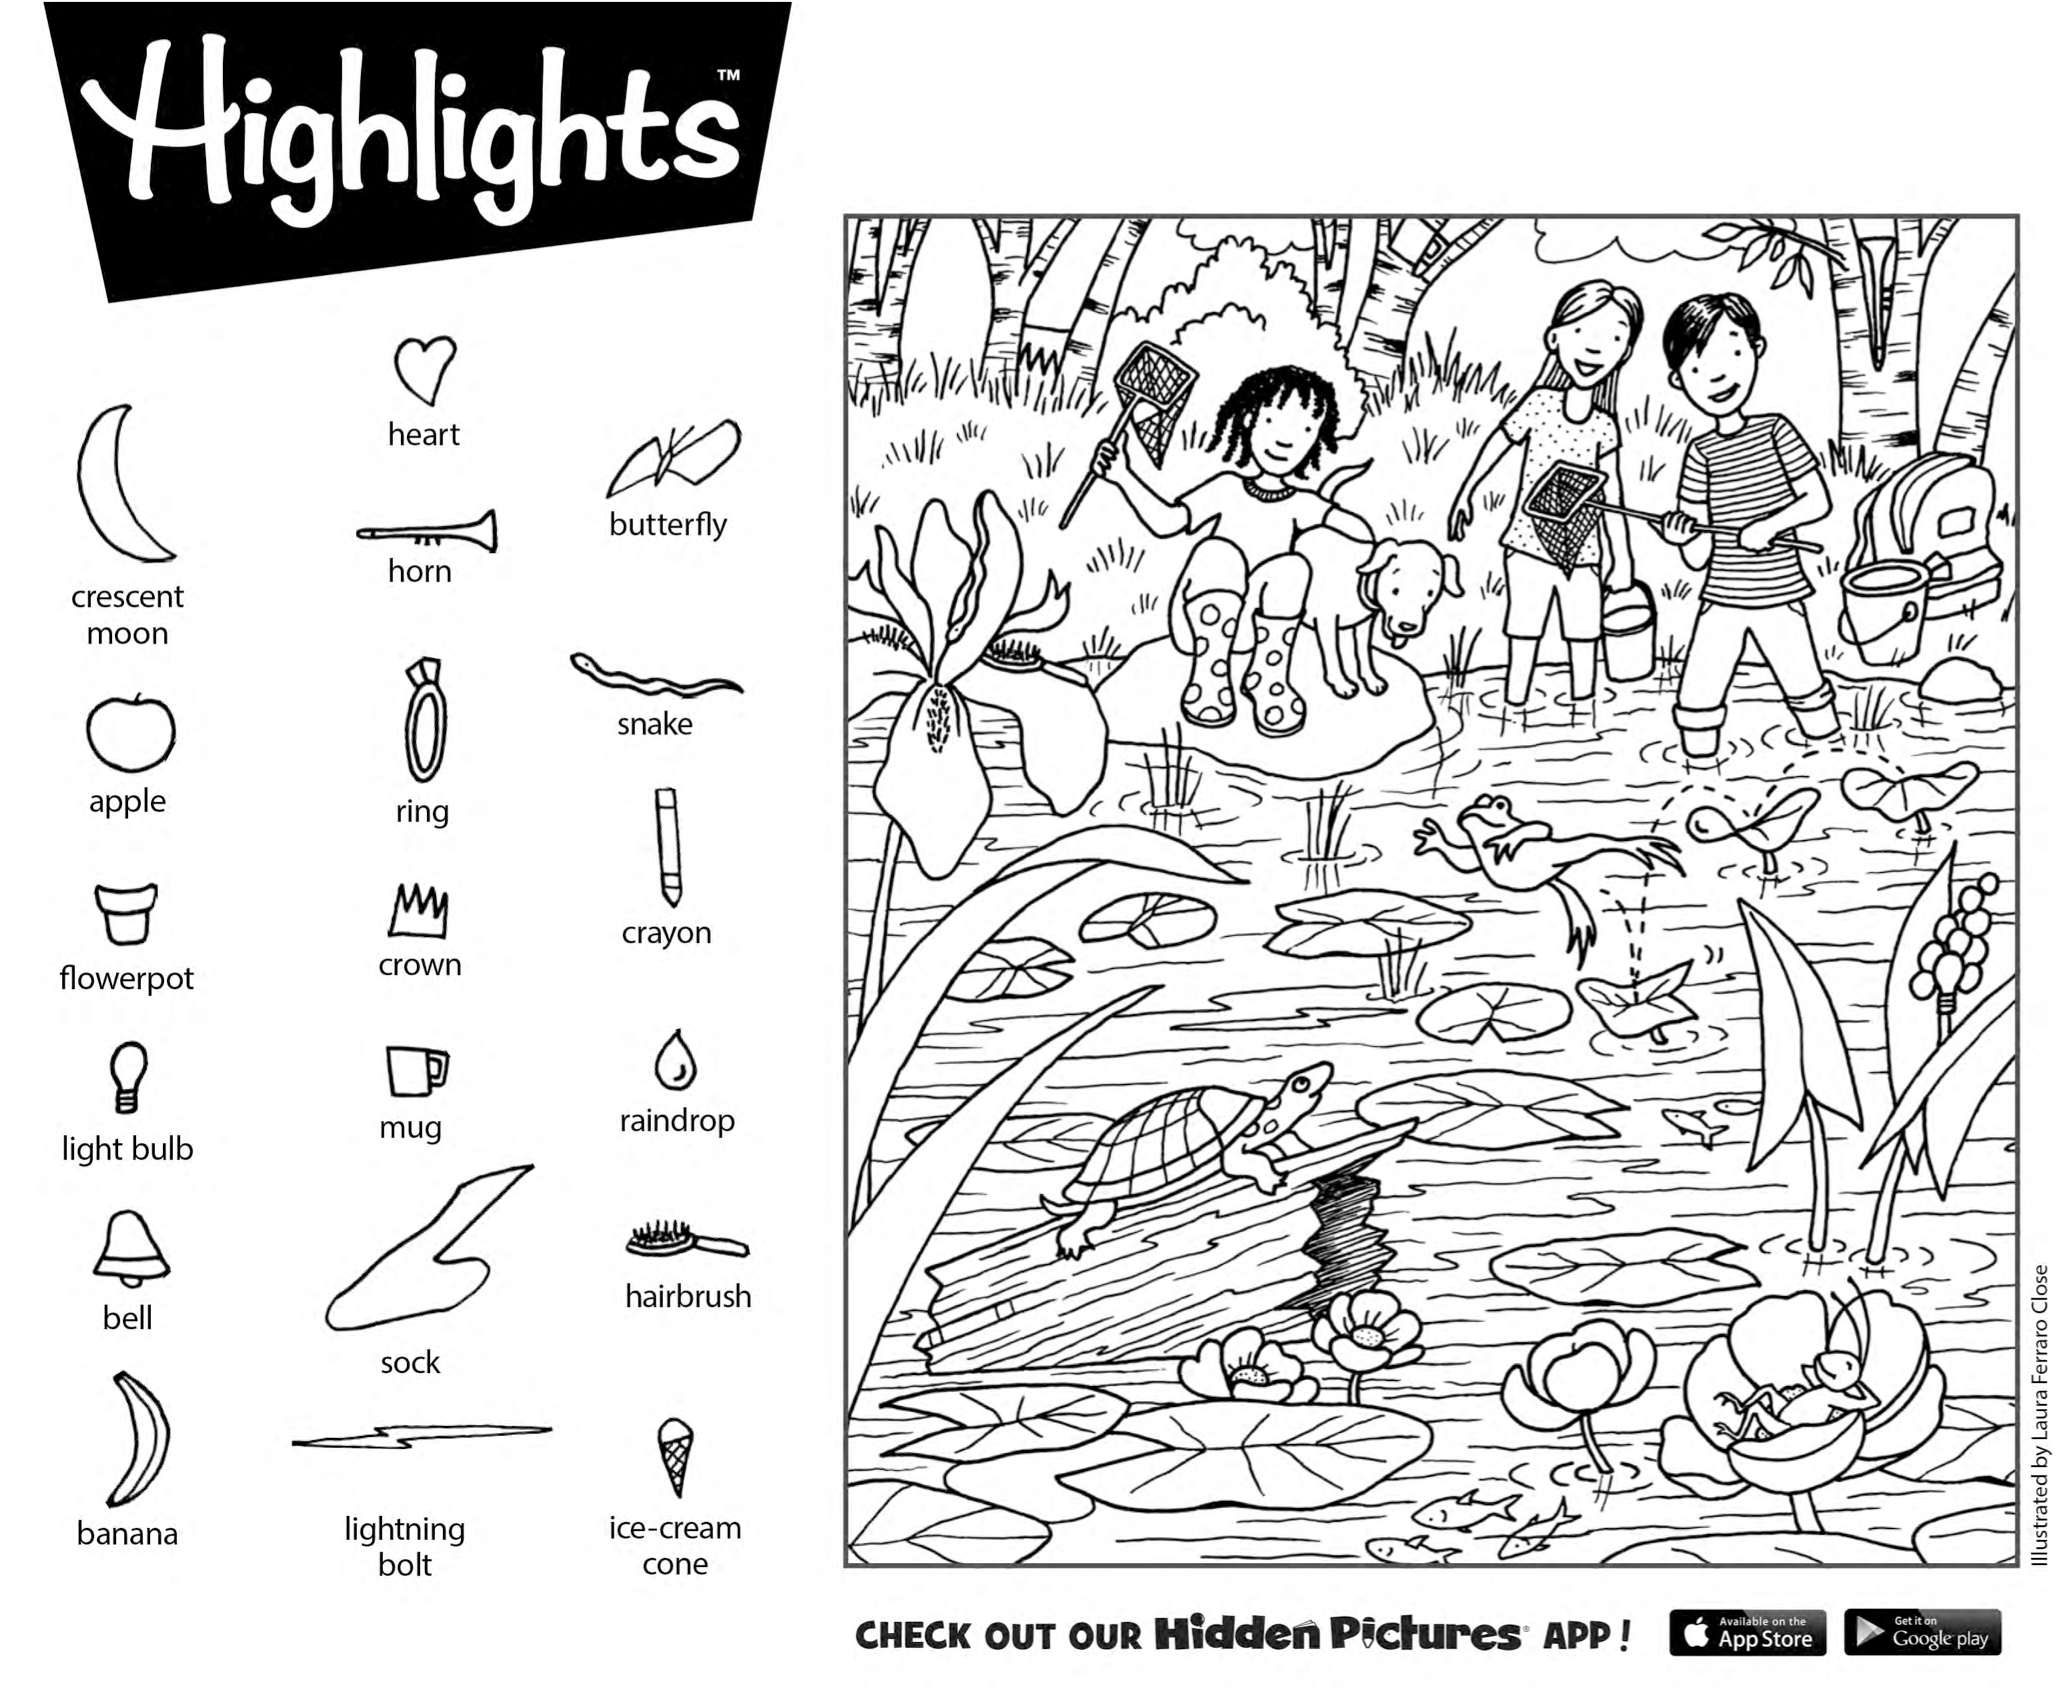 Download This Free Printable Hidden Pictures Puzzle From Highlights For 